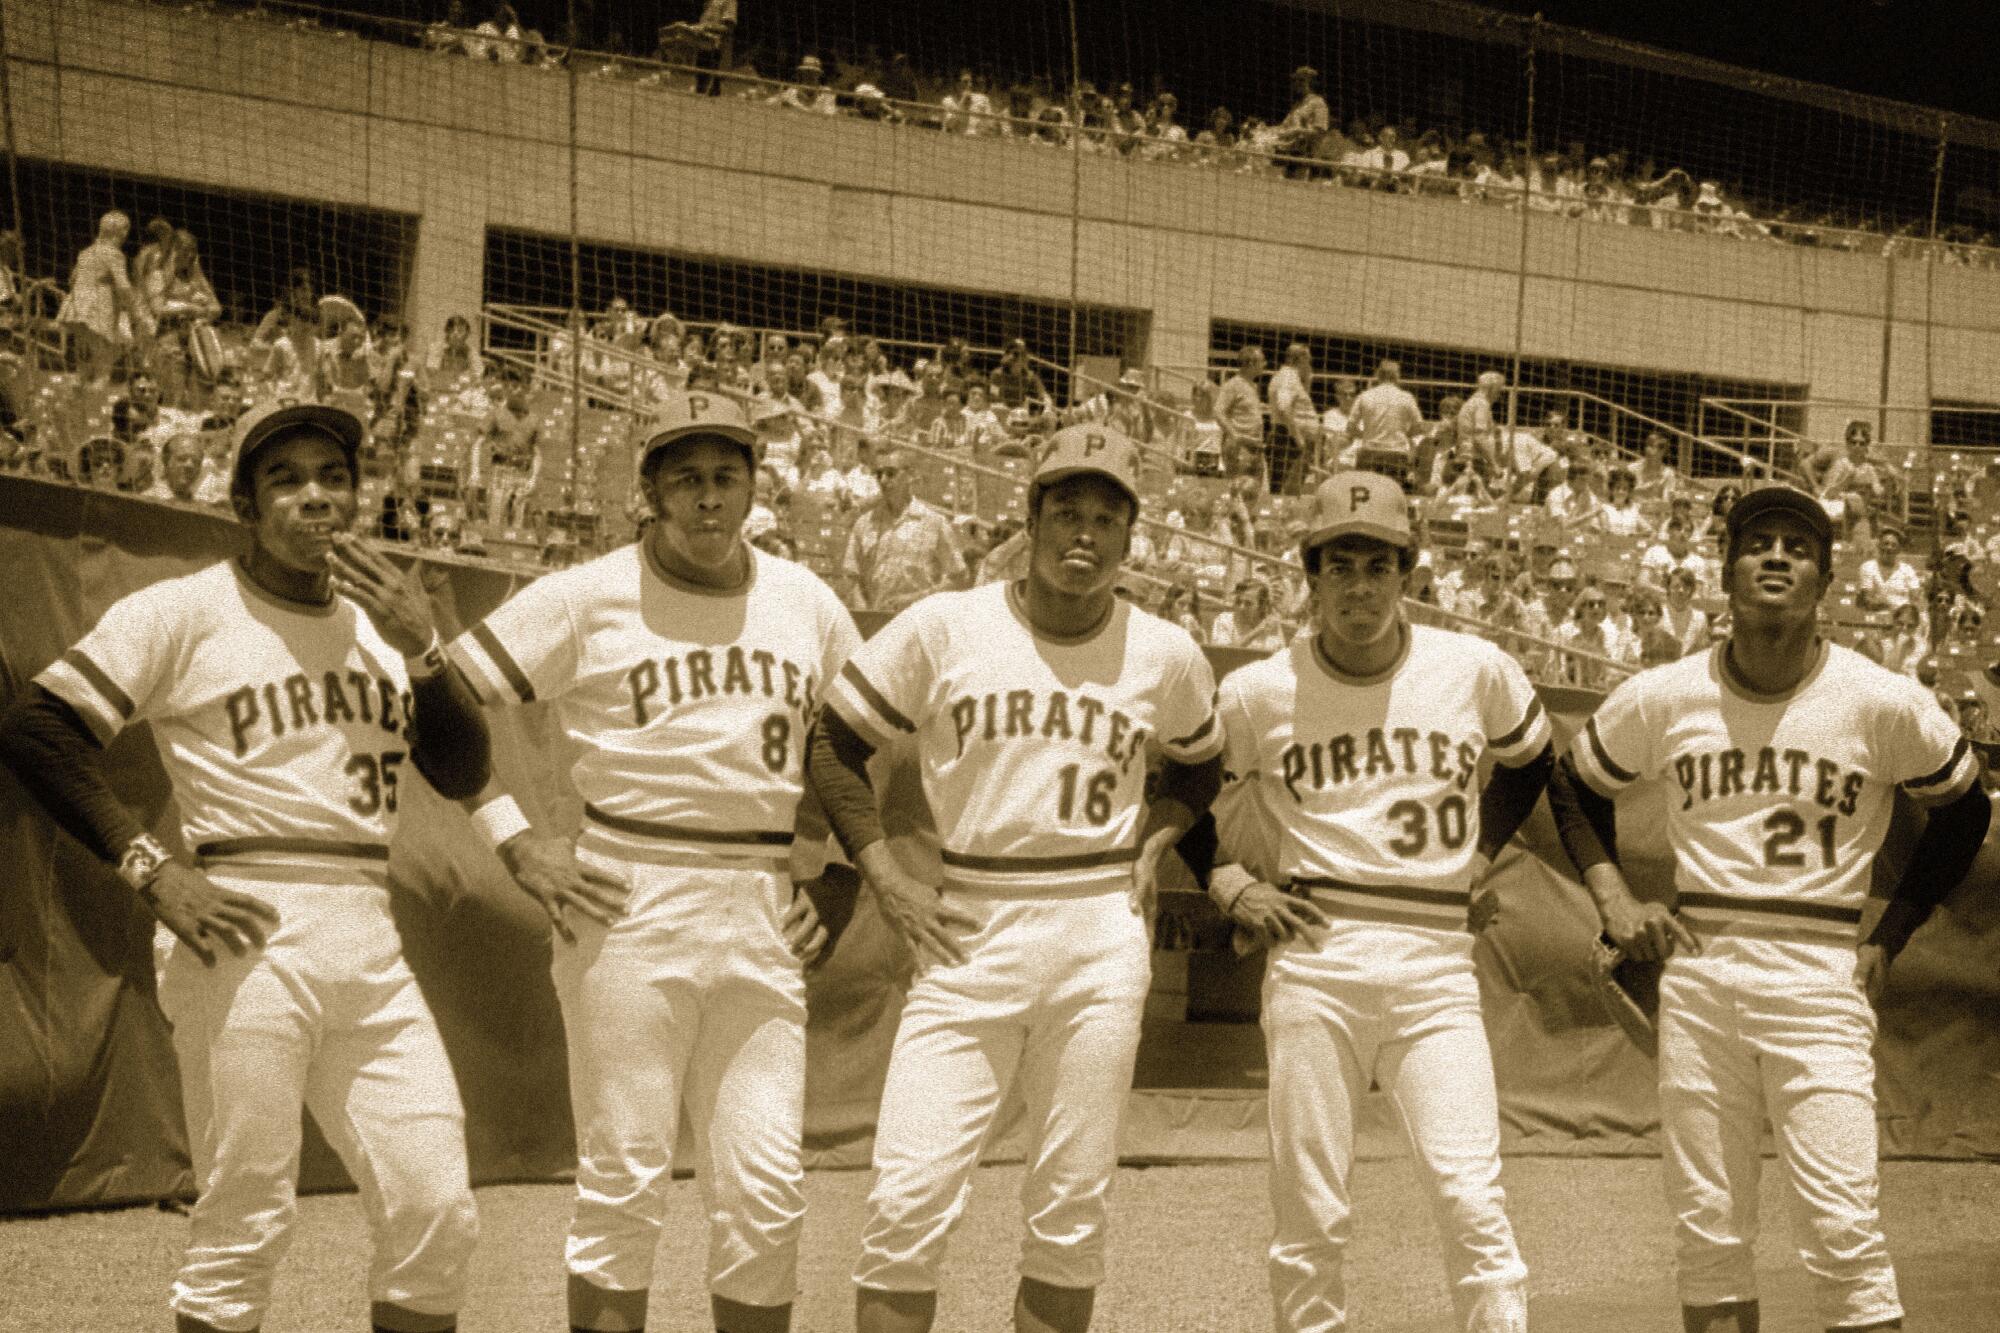 From left to right, Pittsburgh Pirates Manny Sanguillen, Willie Stargell, Al Oliver, Dave Cash and Roberto Clemente 